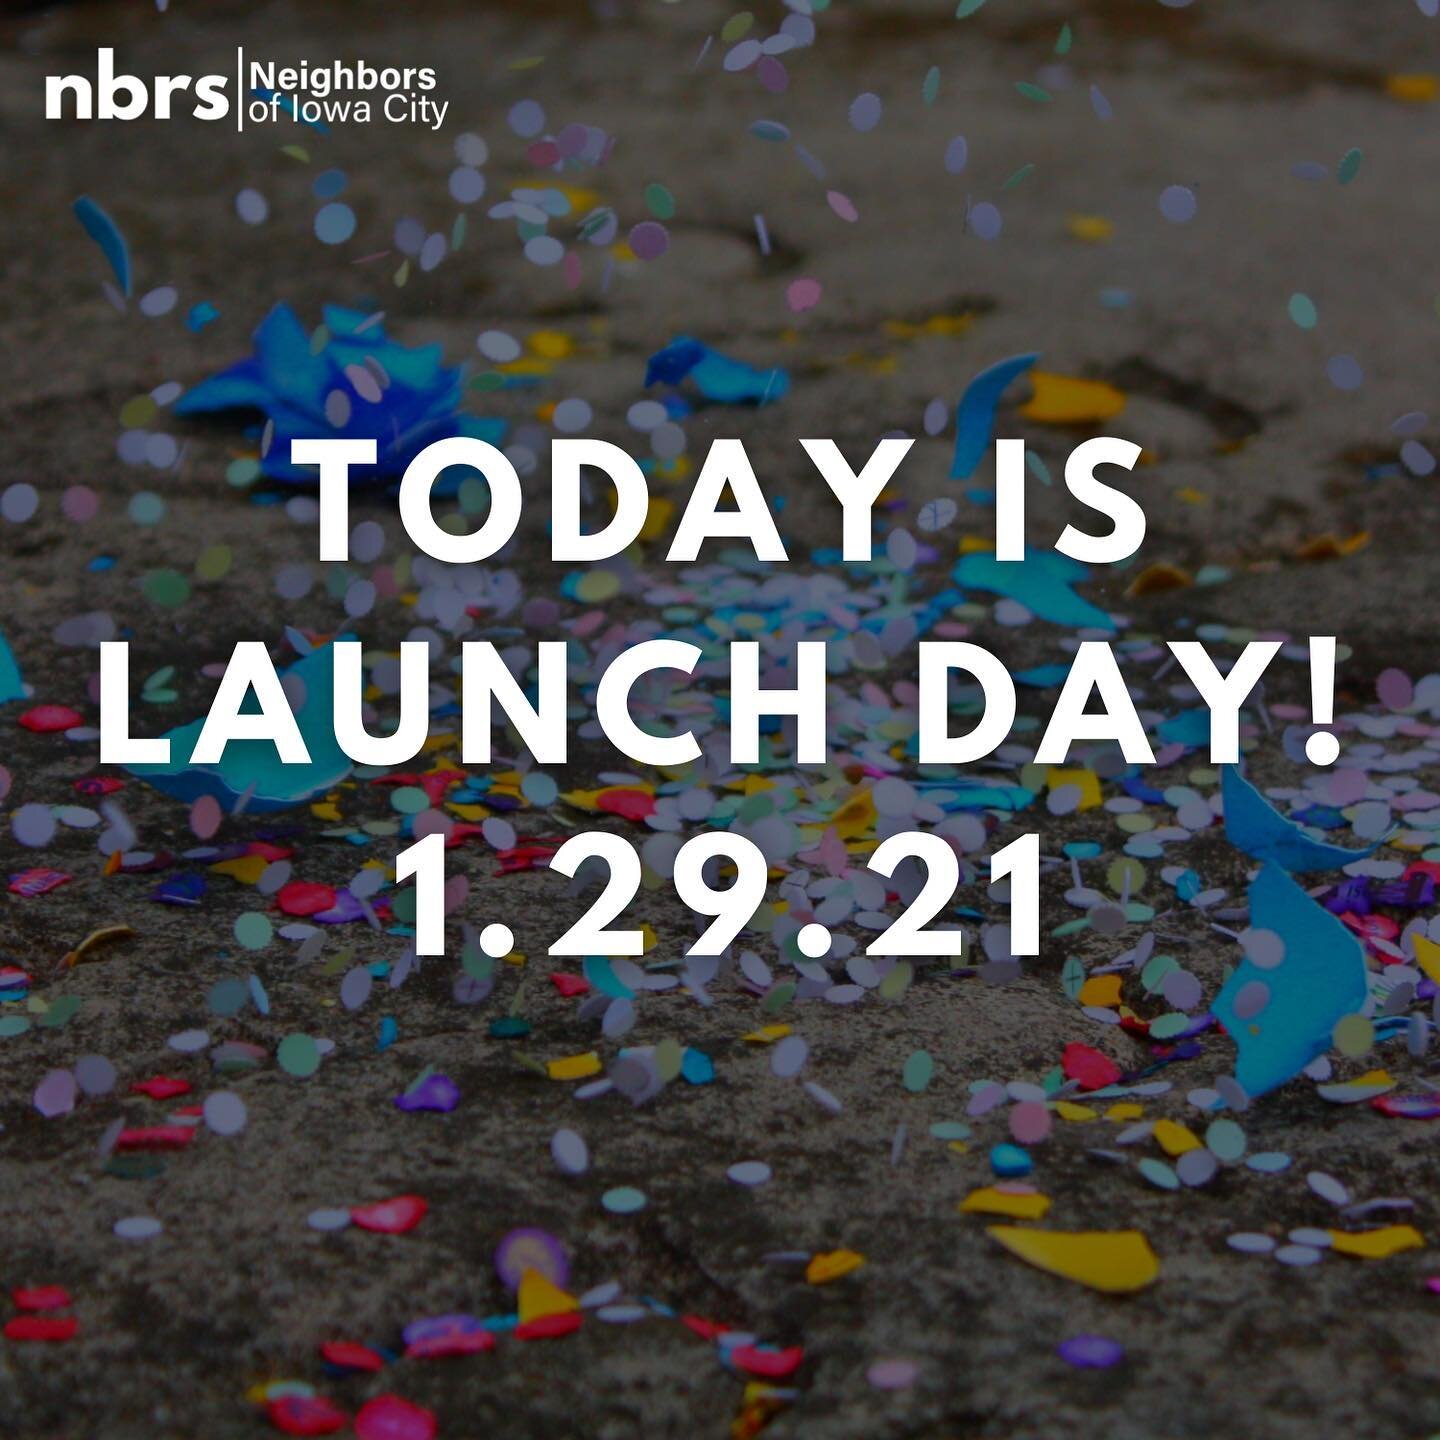 A day when we celebrate launching a mission to love our neighbors!

Swipe to learn how to celebrate with us tonight. ⭐️

Learn more at neighborsofiowacity.org.